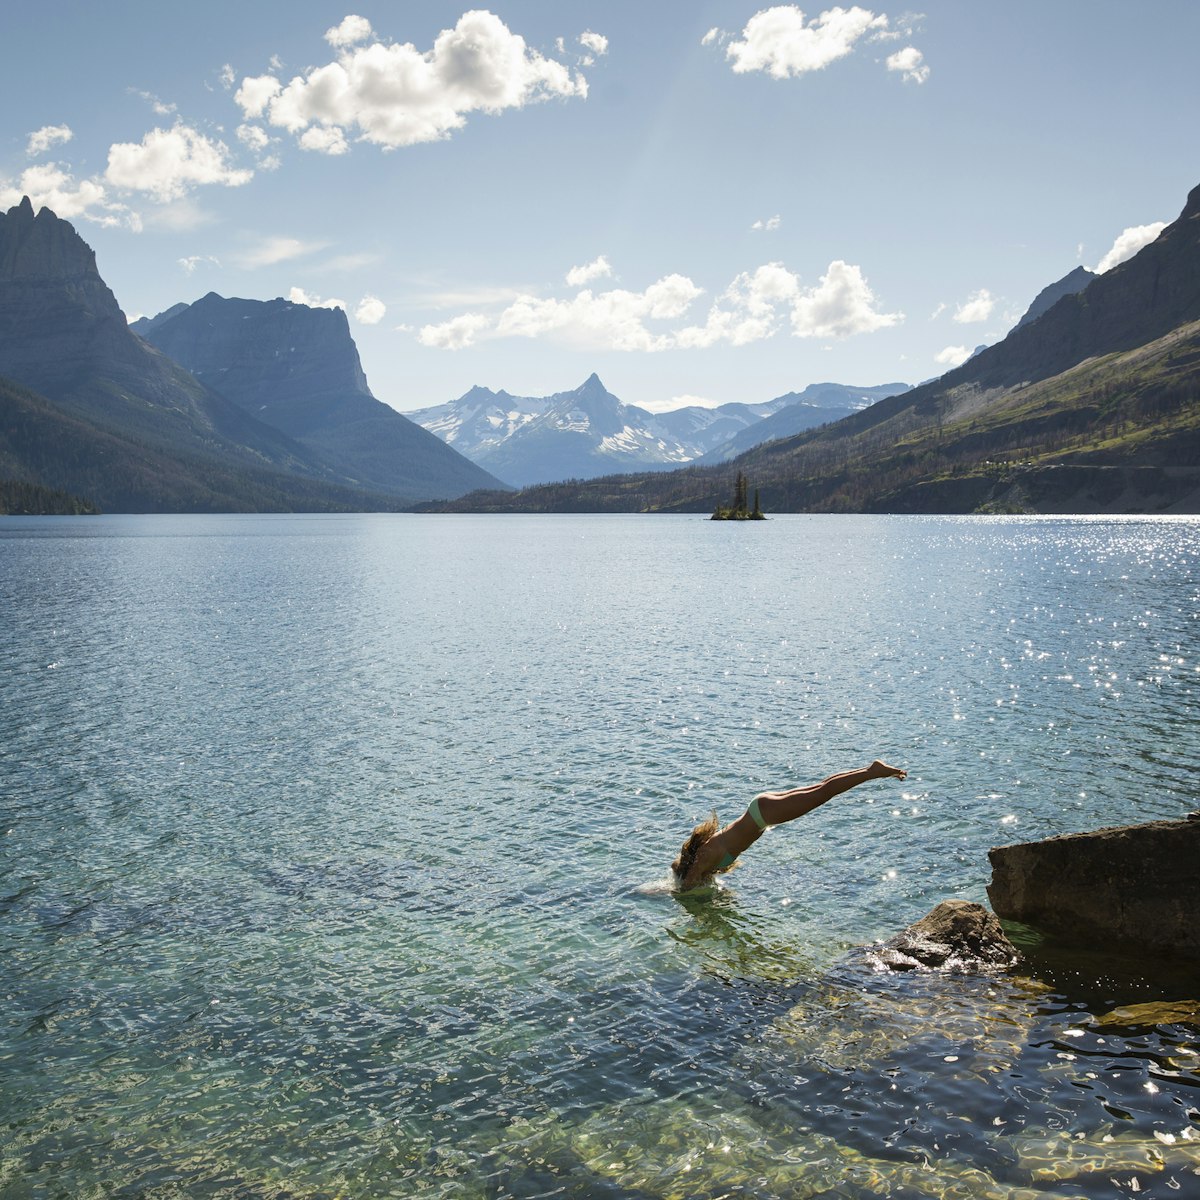 675834161
clear, glacier national park, mountains, summer, swimming